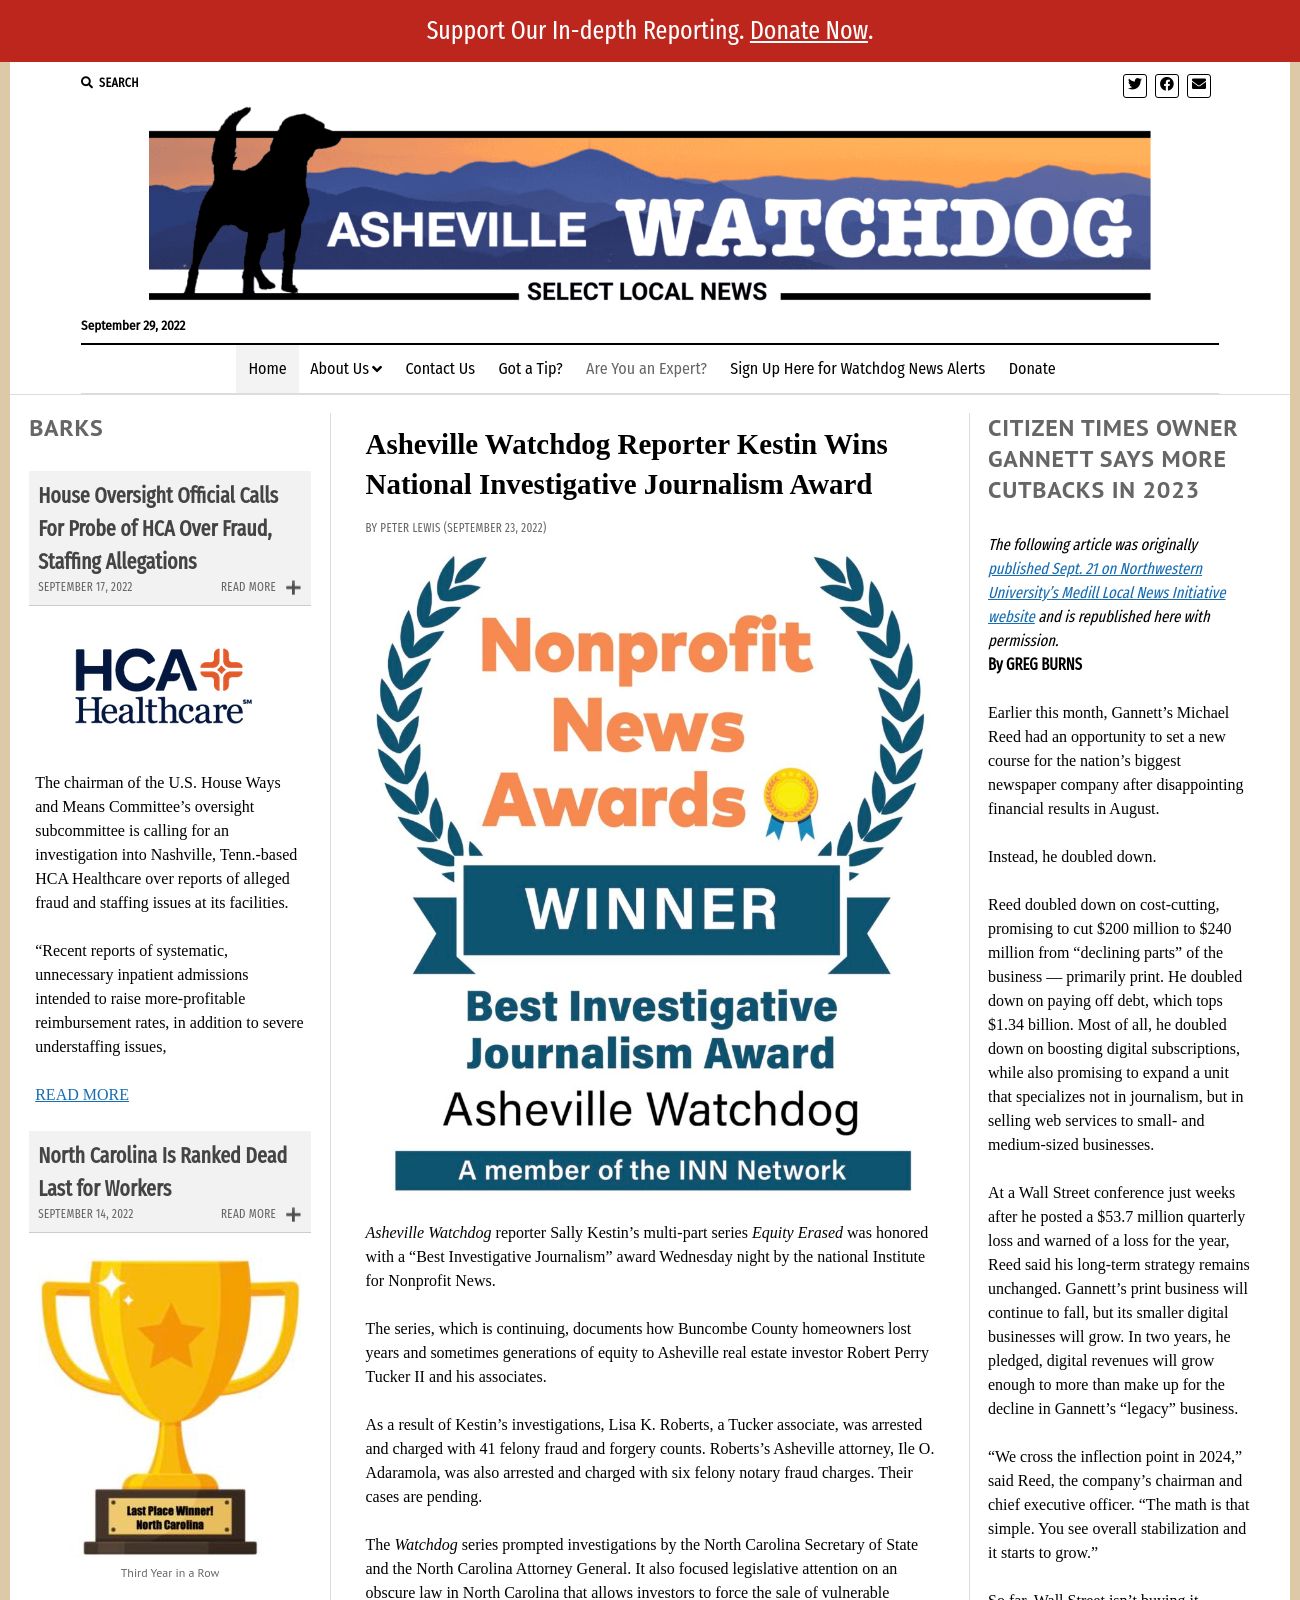 Asheville Watchdog at 2022-09-29 19:01:53-04:00 local time